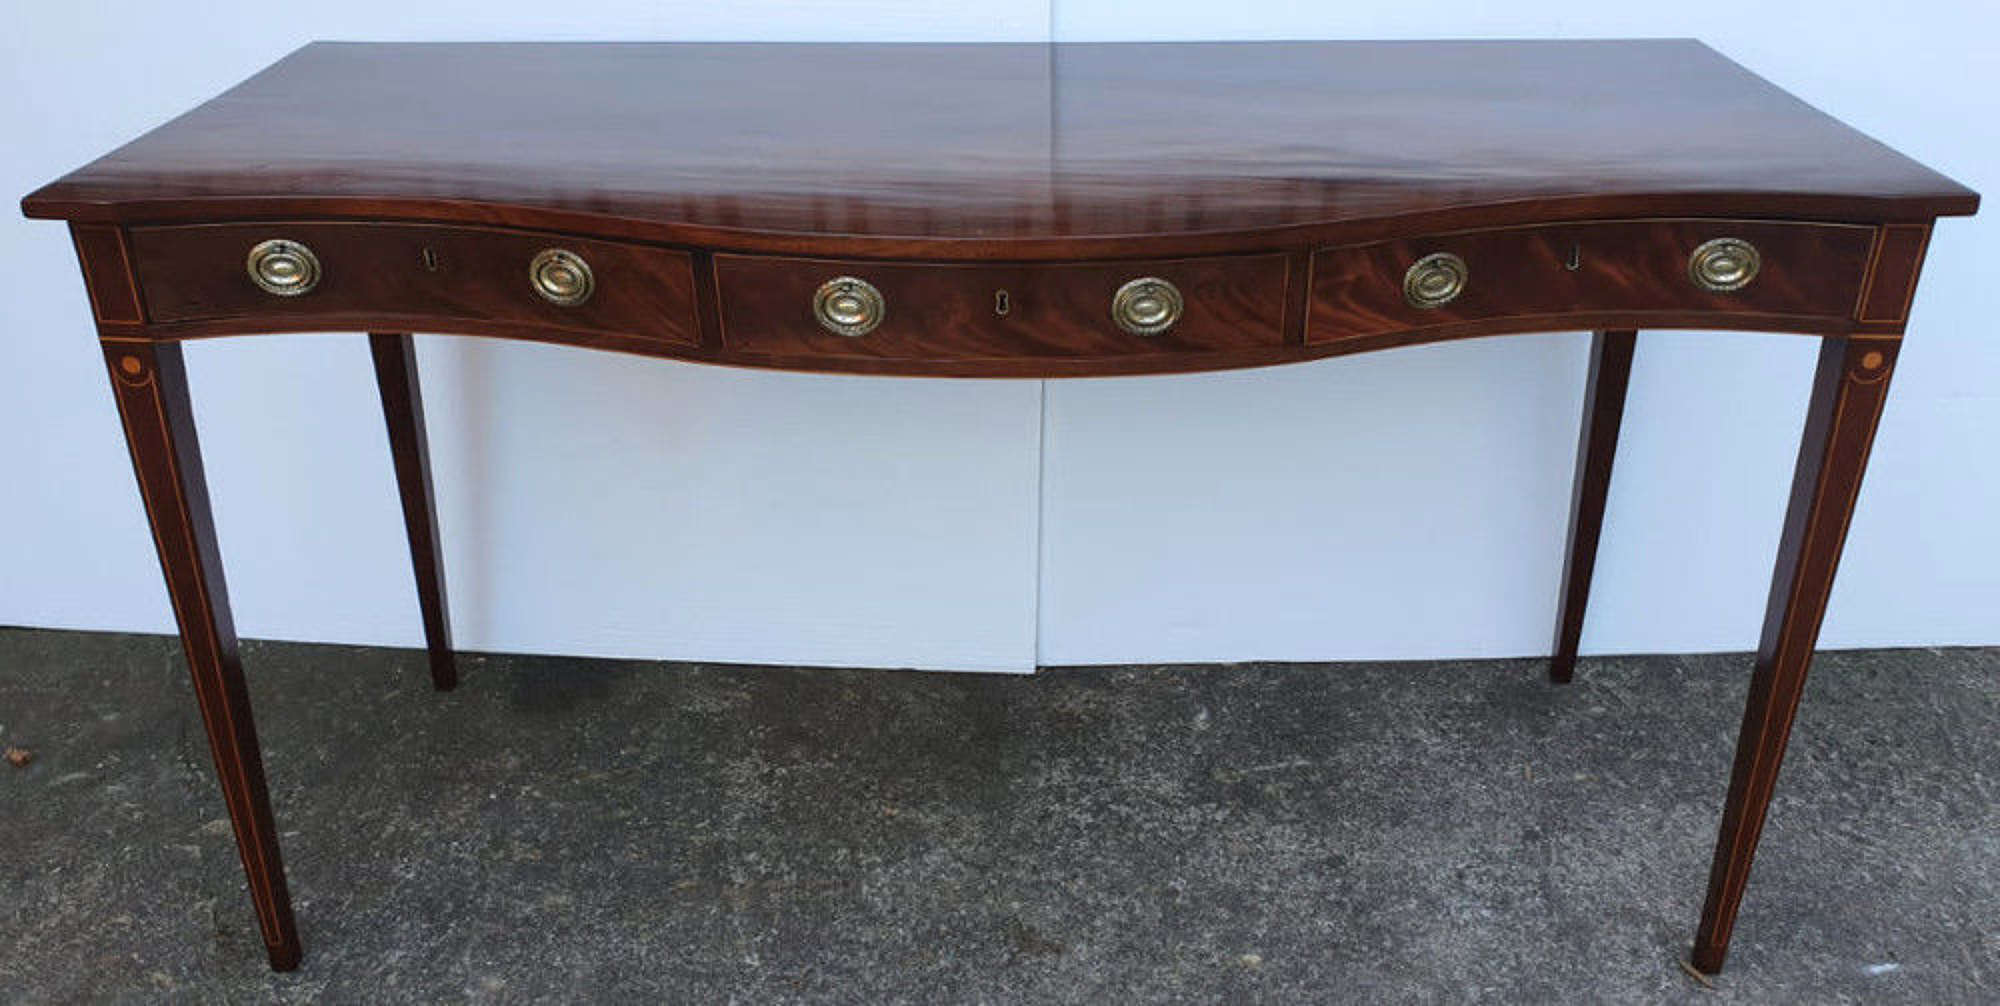 Top Quality Early 19th Century Mahogany Serving Or Antique Console Table